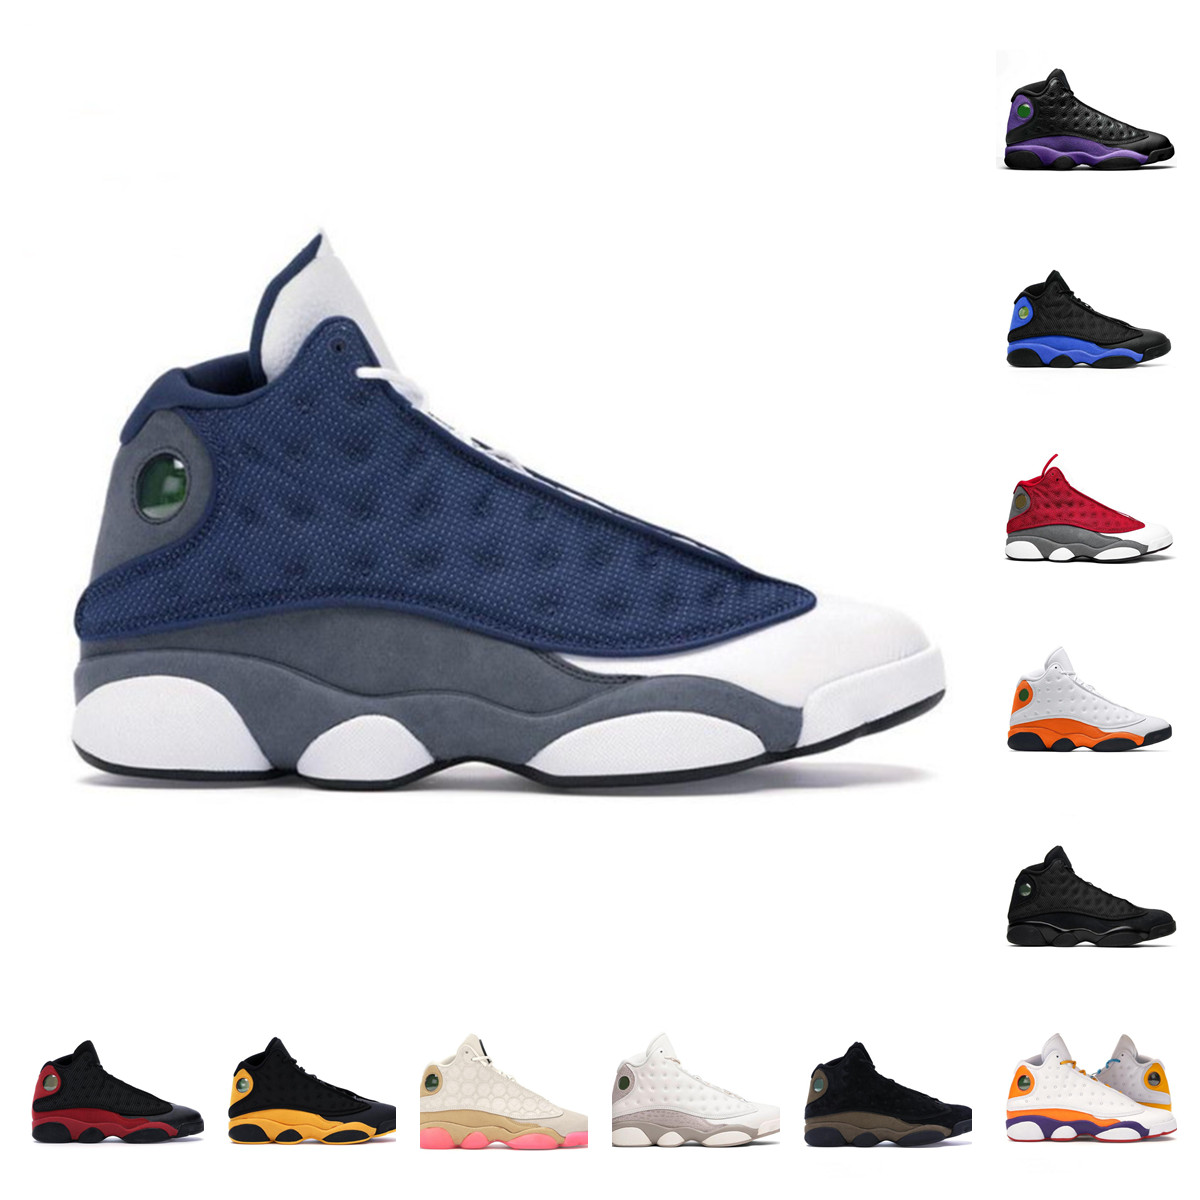 

Wholesale men women 13 basketball shoes Black Island Green Chicago Bred Reverse He Got Game 13s sneakers Playground Olive Lakers Gym Red Flint Grey mens sports shoes, Original shoe box